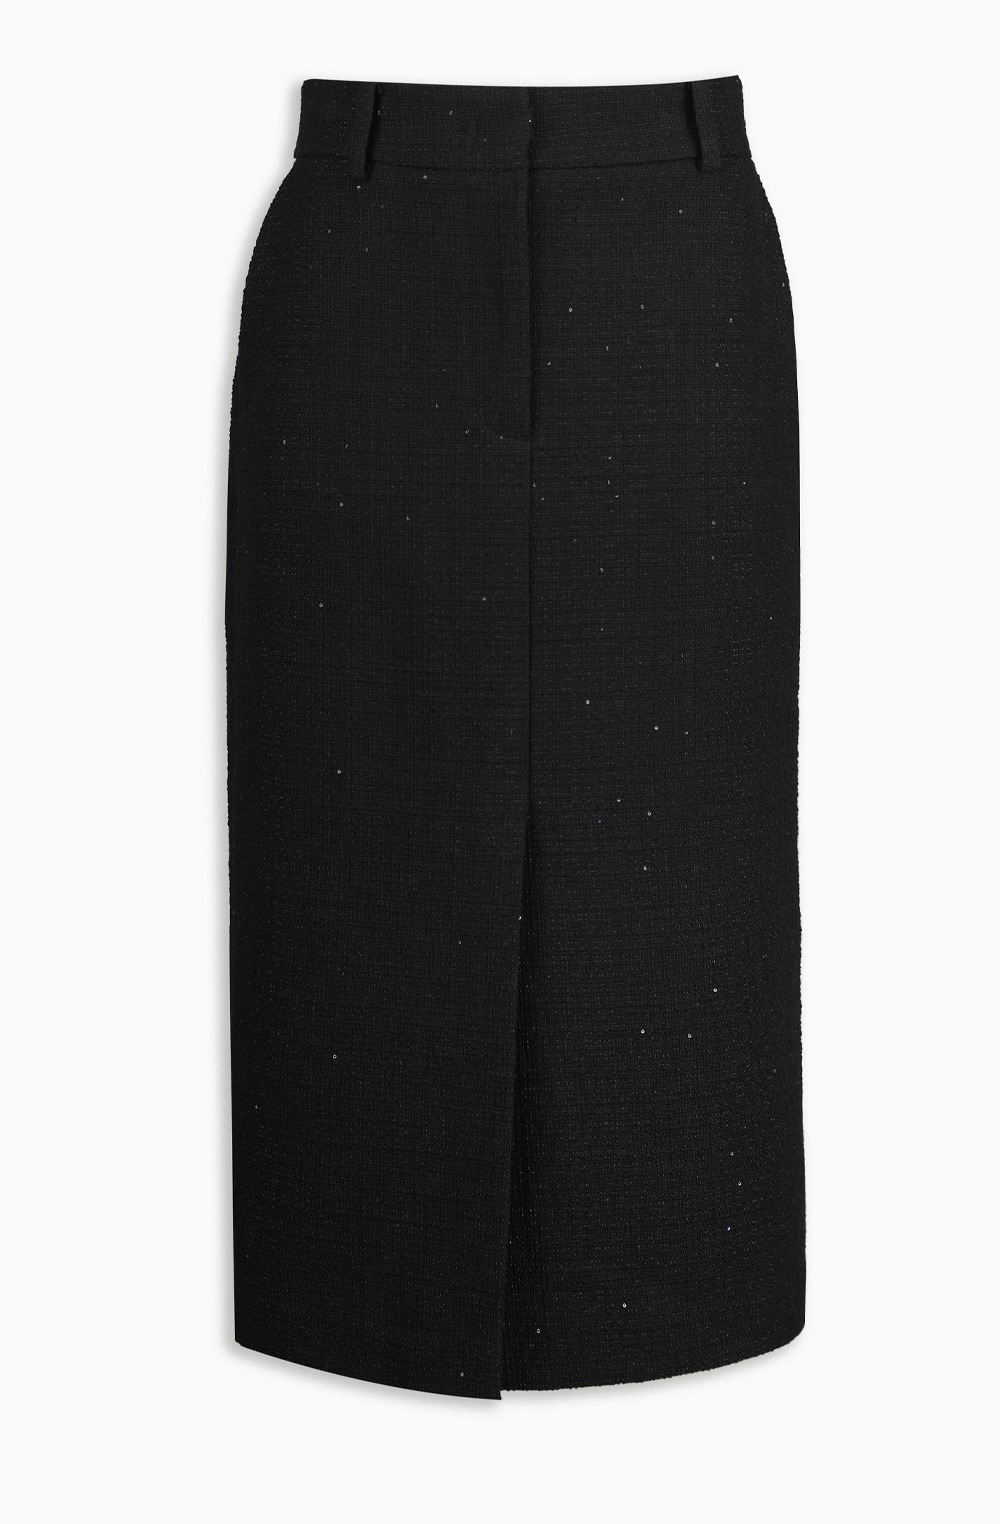 HIGH QUALITY LINE - Mignon Black Sequin Tweed Skirt (Fabric by BALLI, Made in ITALY)